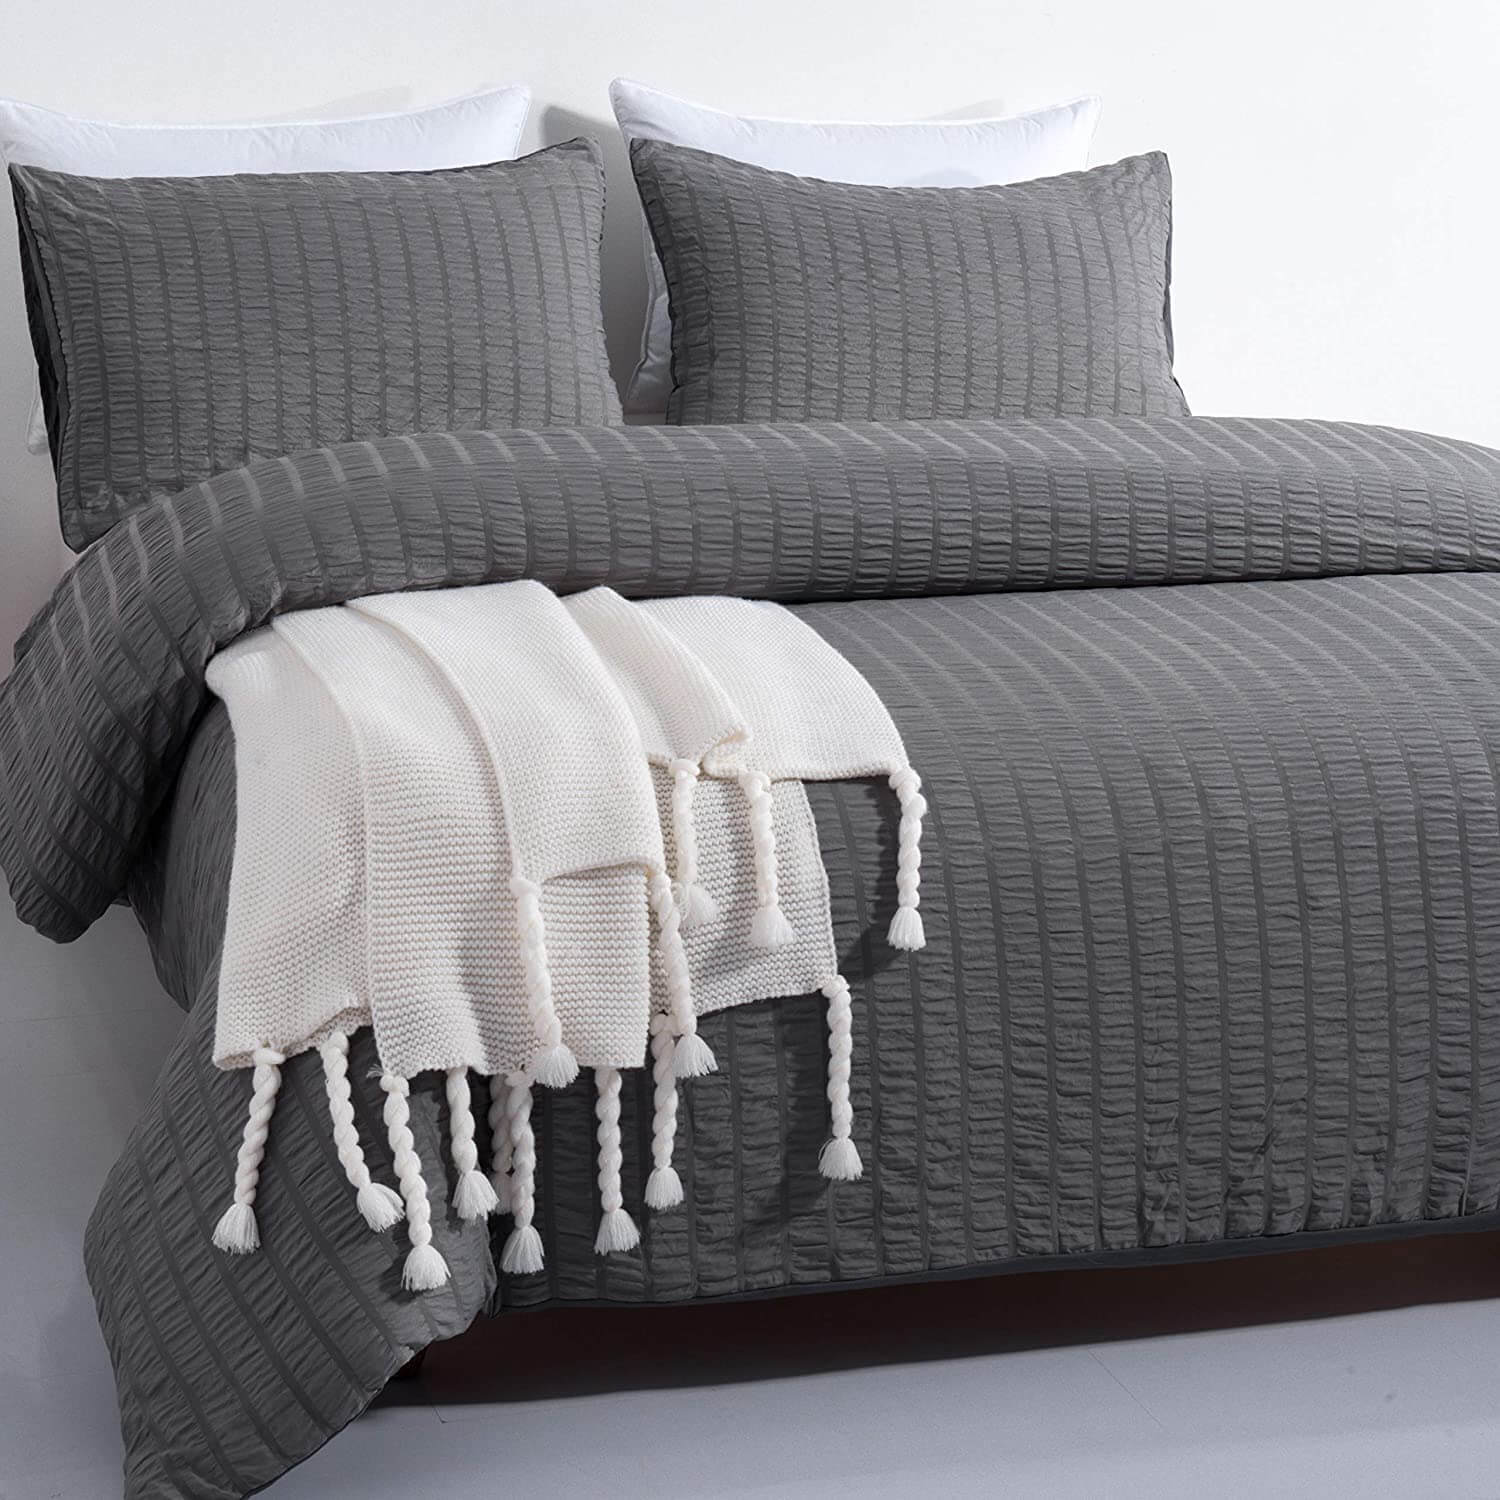 Seersucker Washed Cotton Duvet Cover sets - Gray FULL/QUEEN/KING